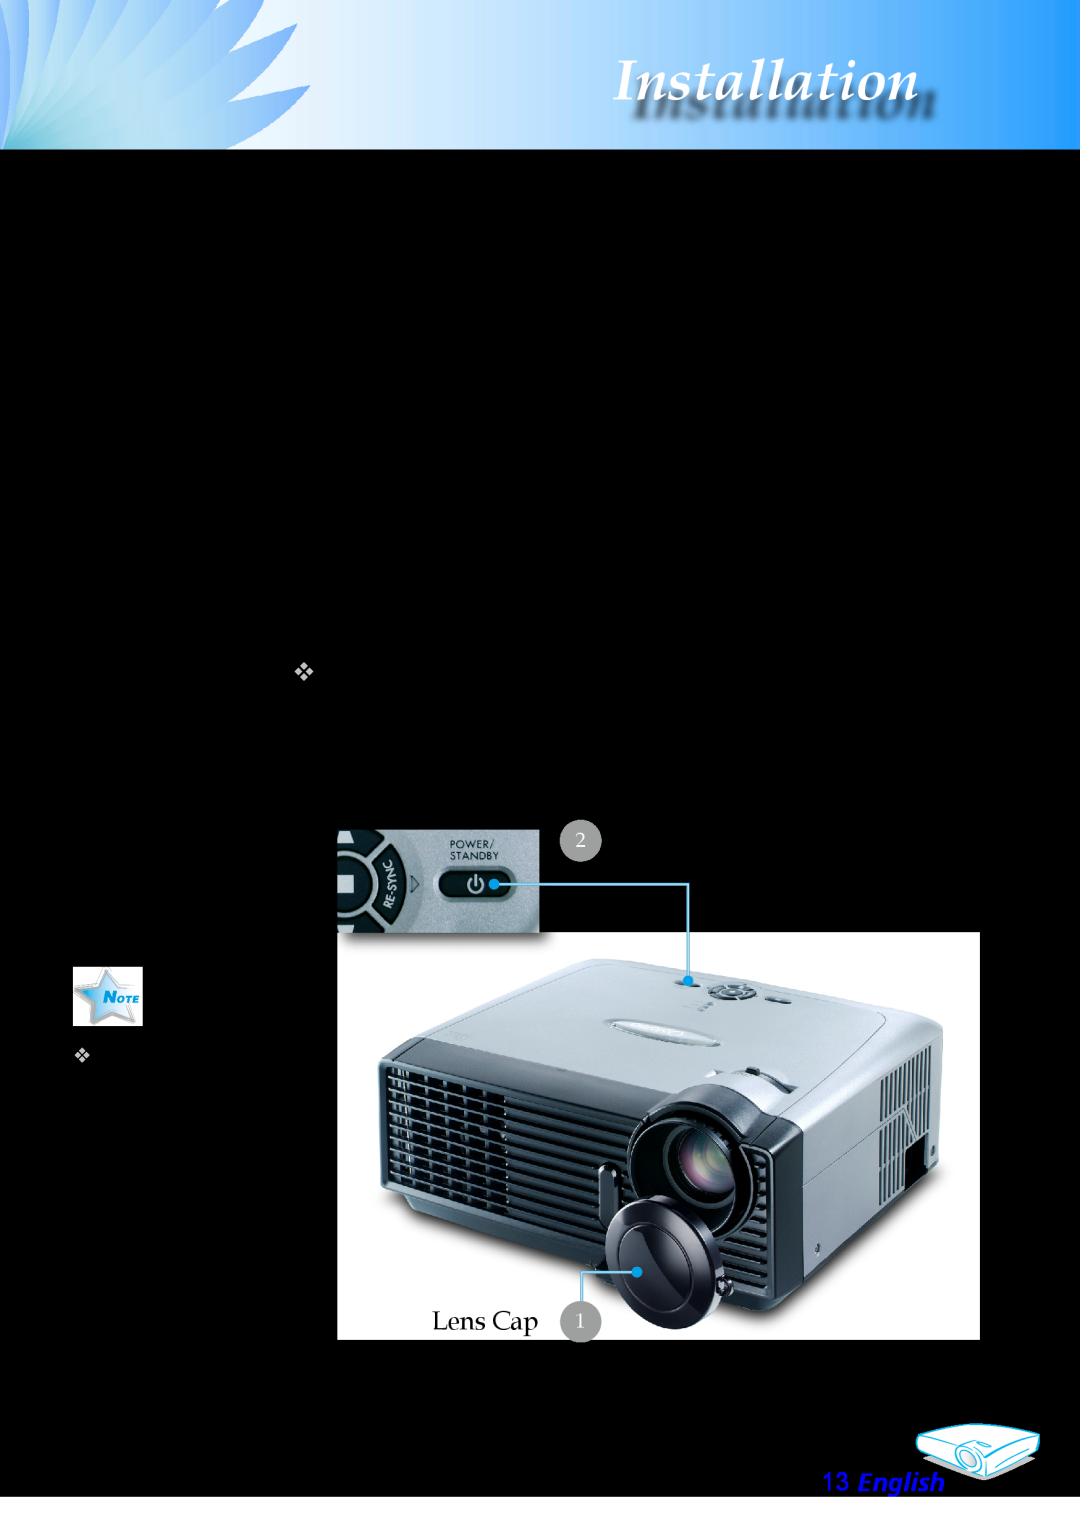 Optoma Technology EP706 manual Powering On/Off the Projector, Powering On the Projector, Lens Cap, English, Installation 